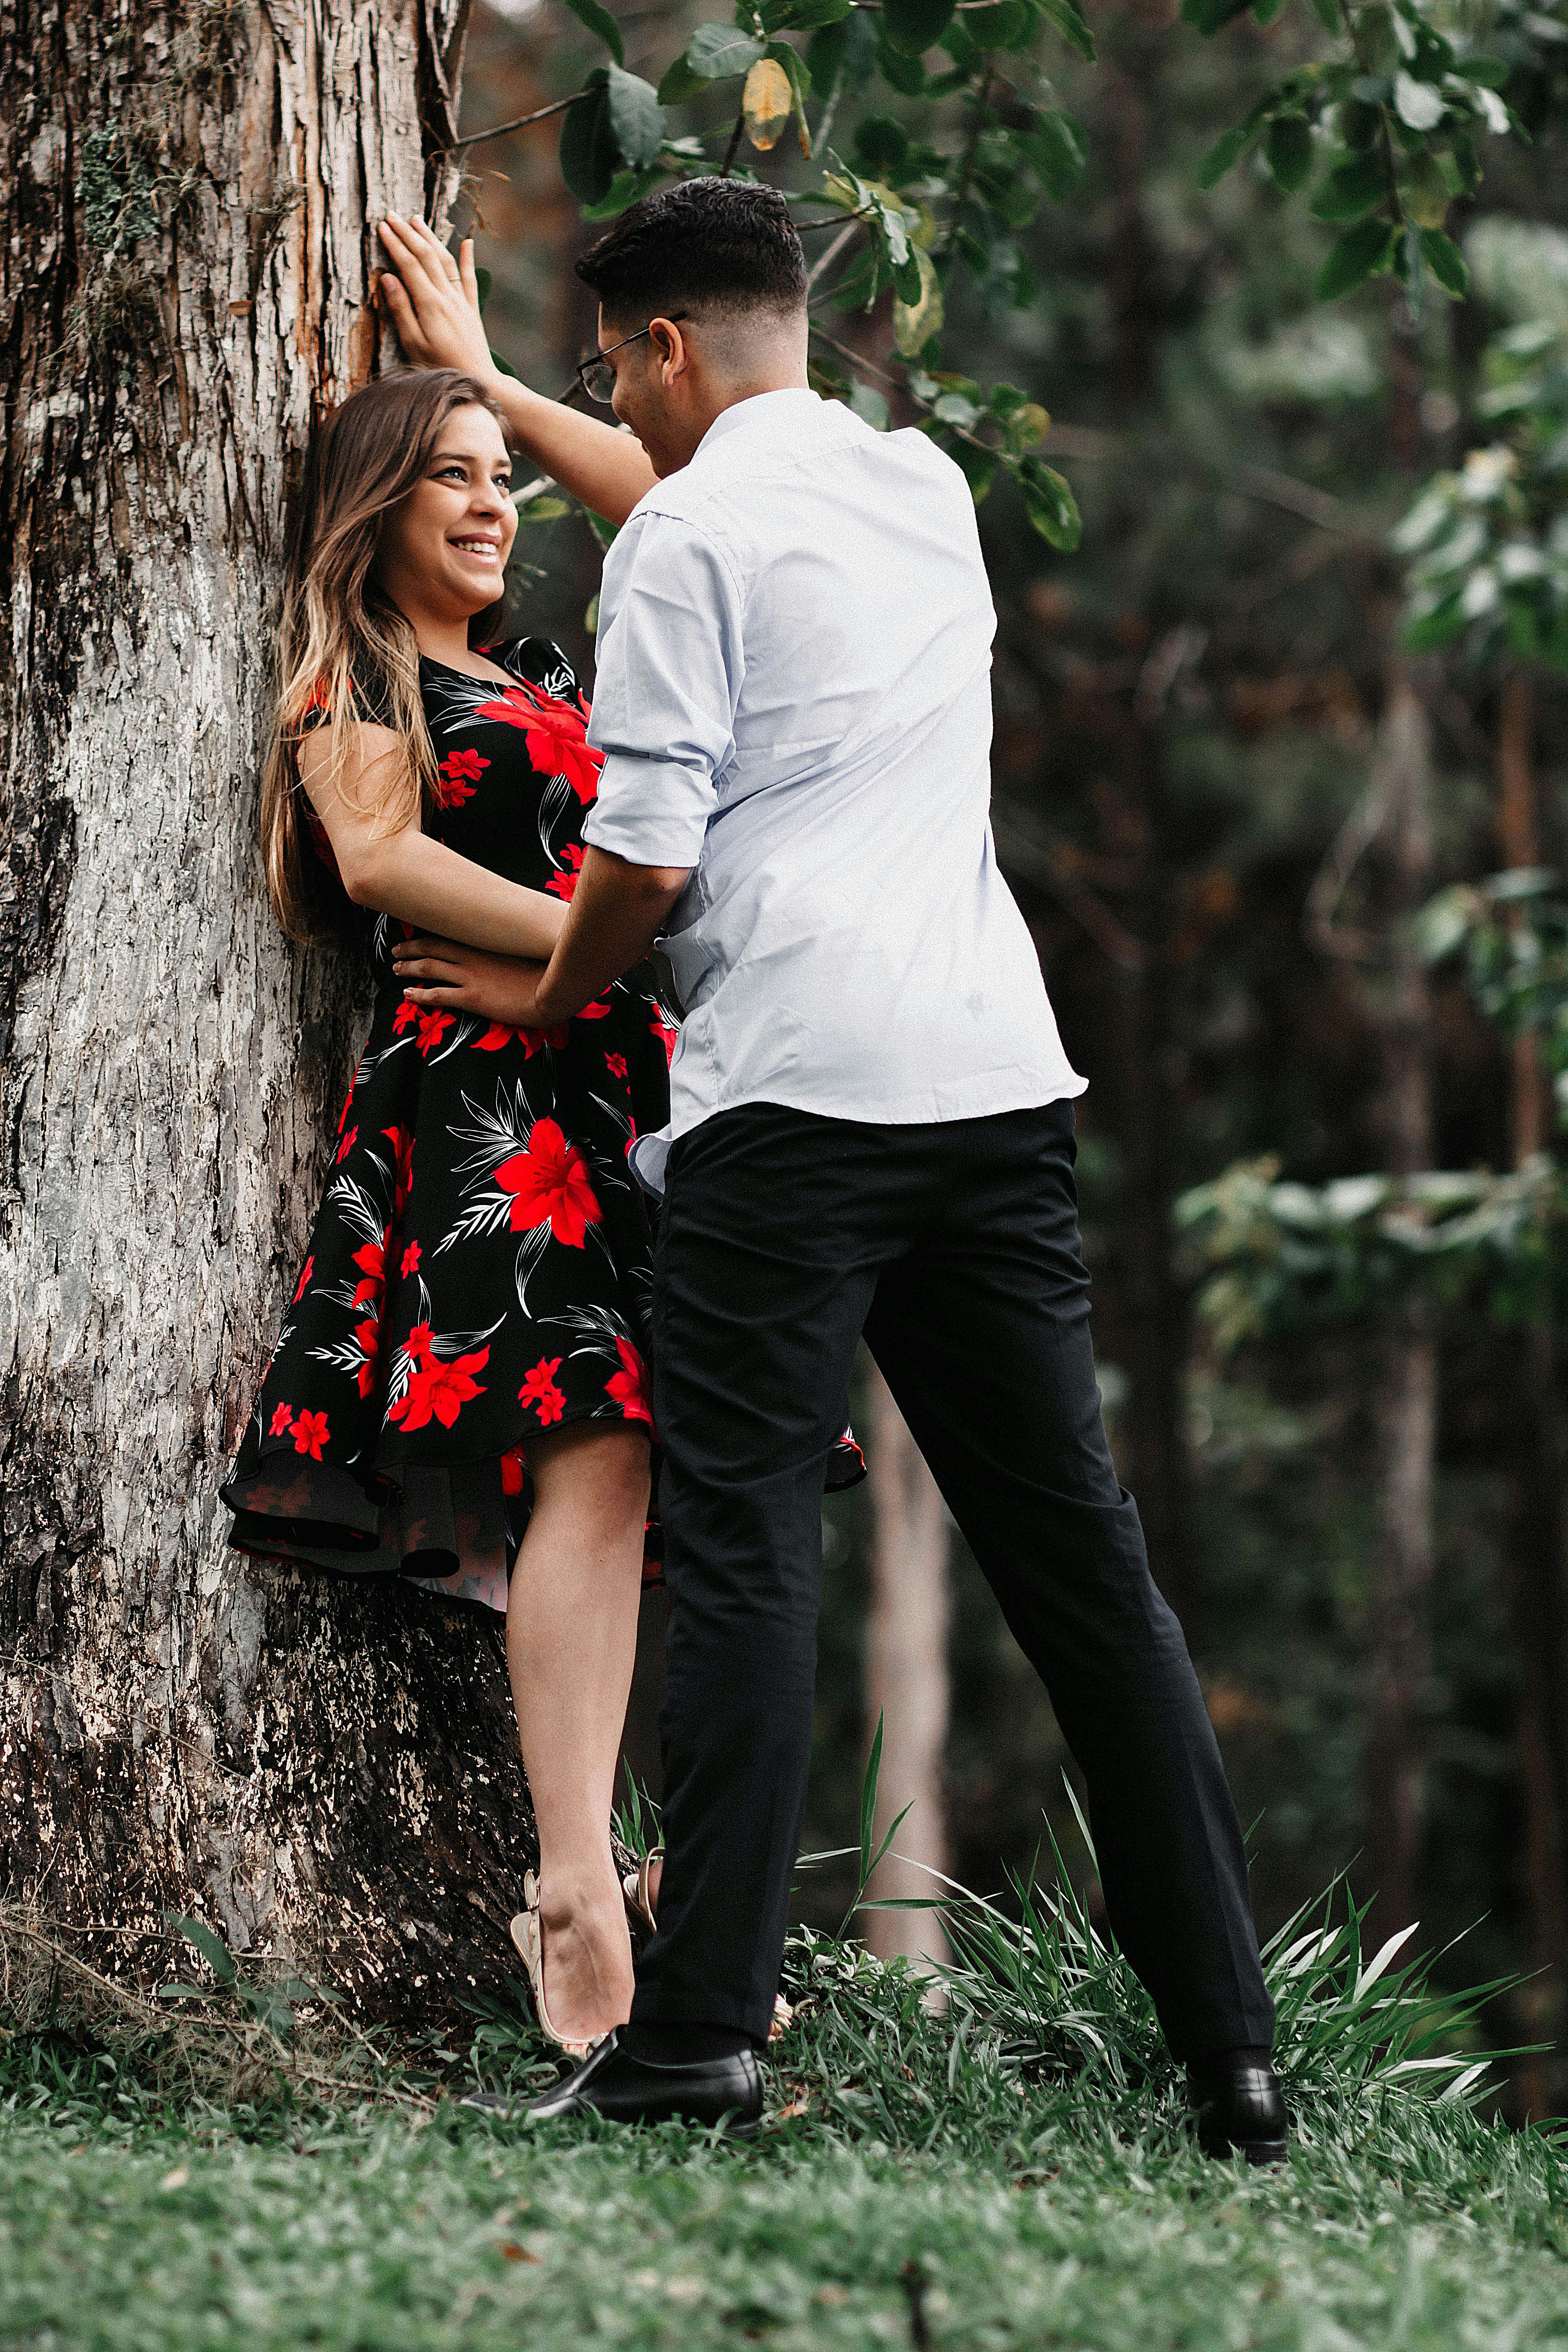 Pin by JAGTESHWAR on Singer | Couple photoshoot poses, Romantic couples  photography, Cute couples